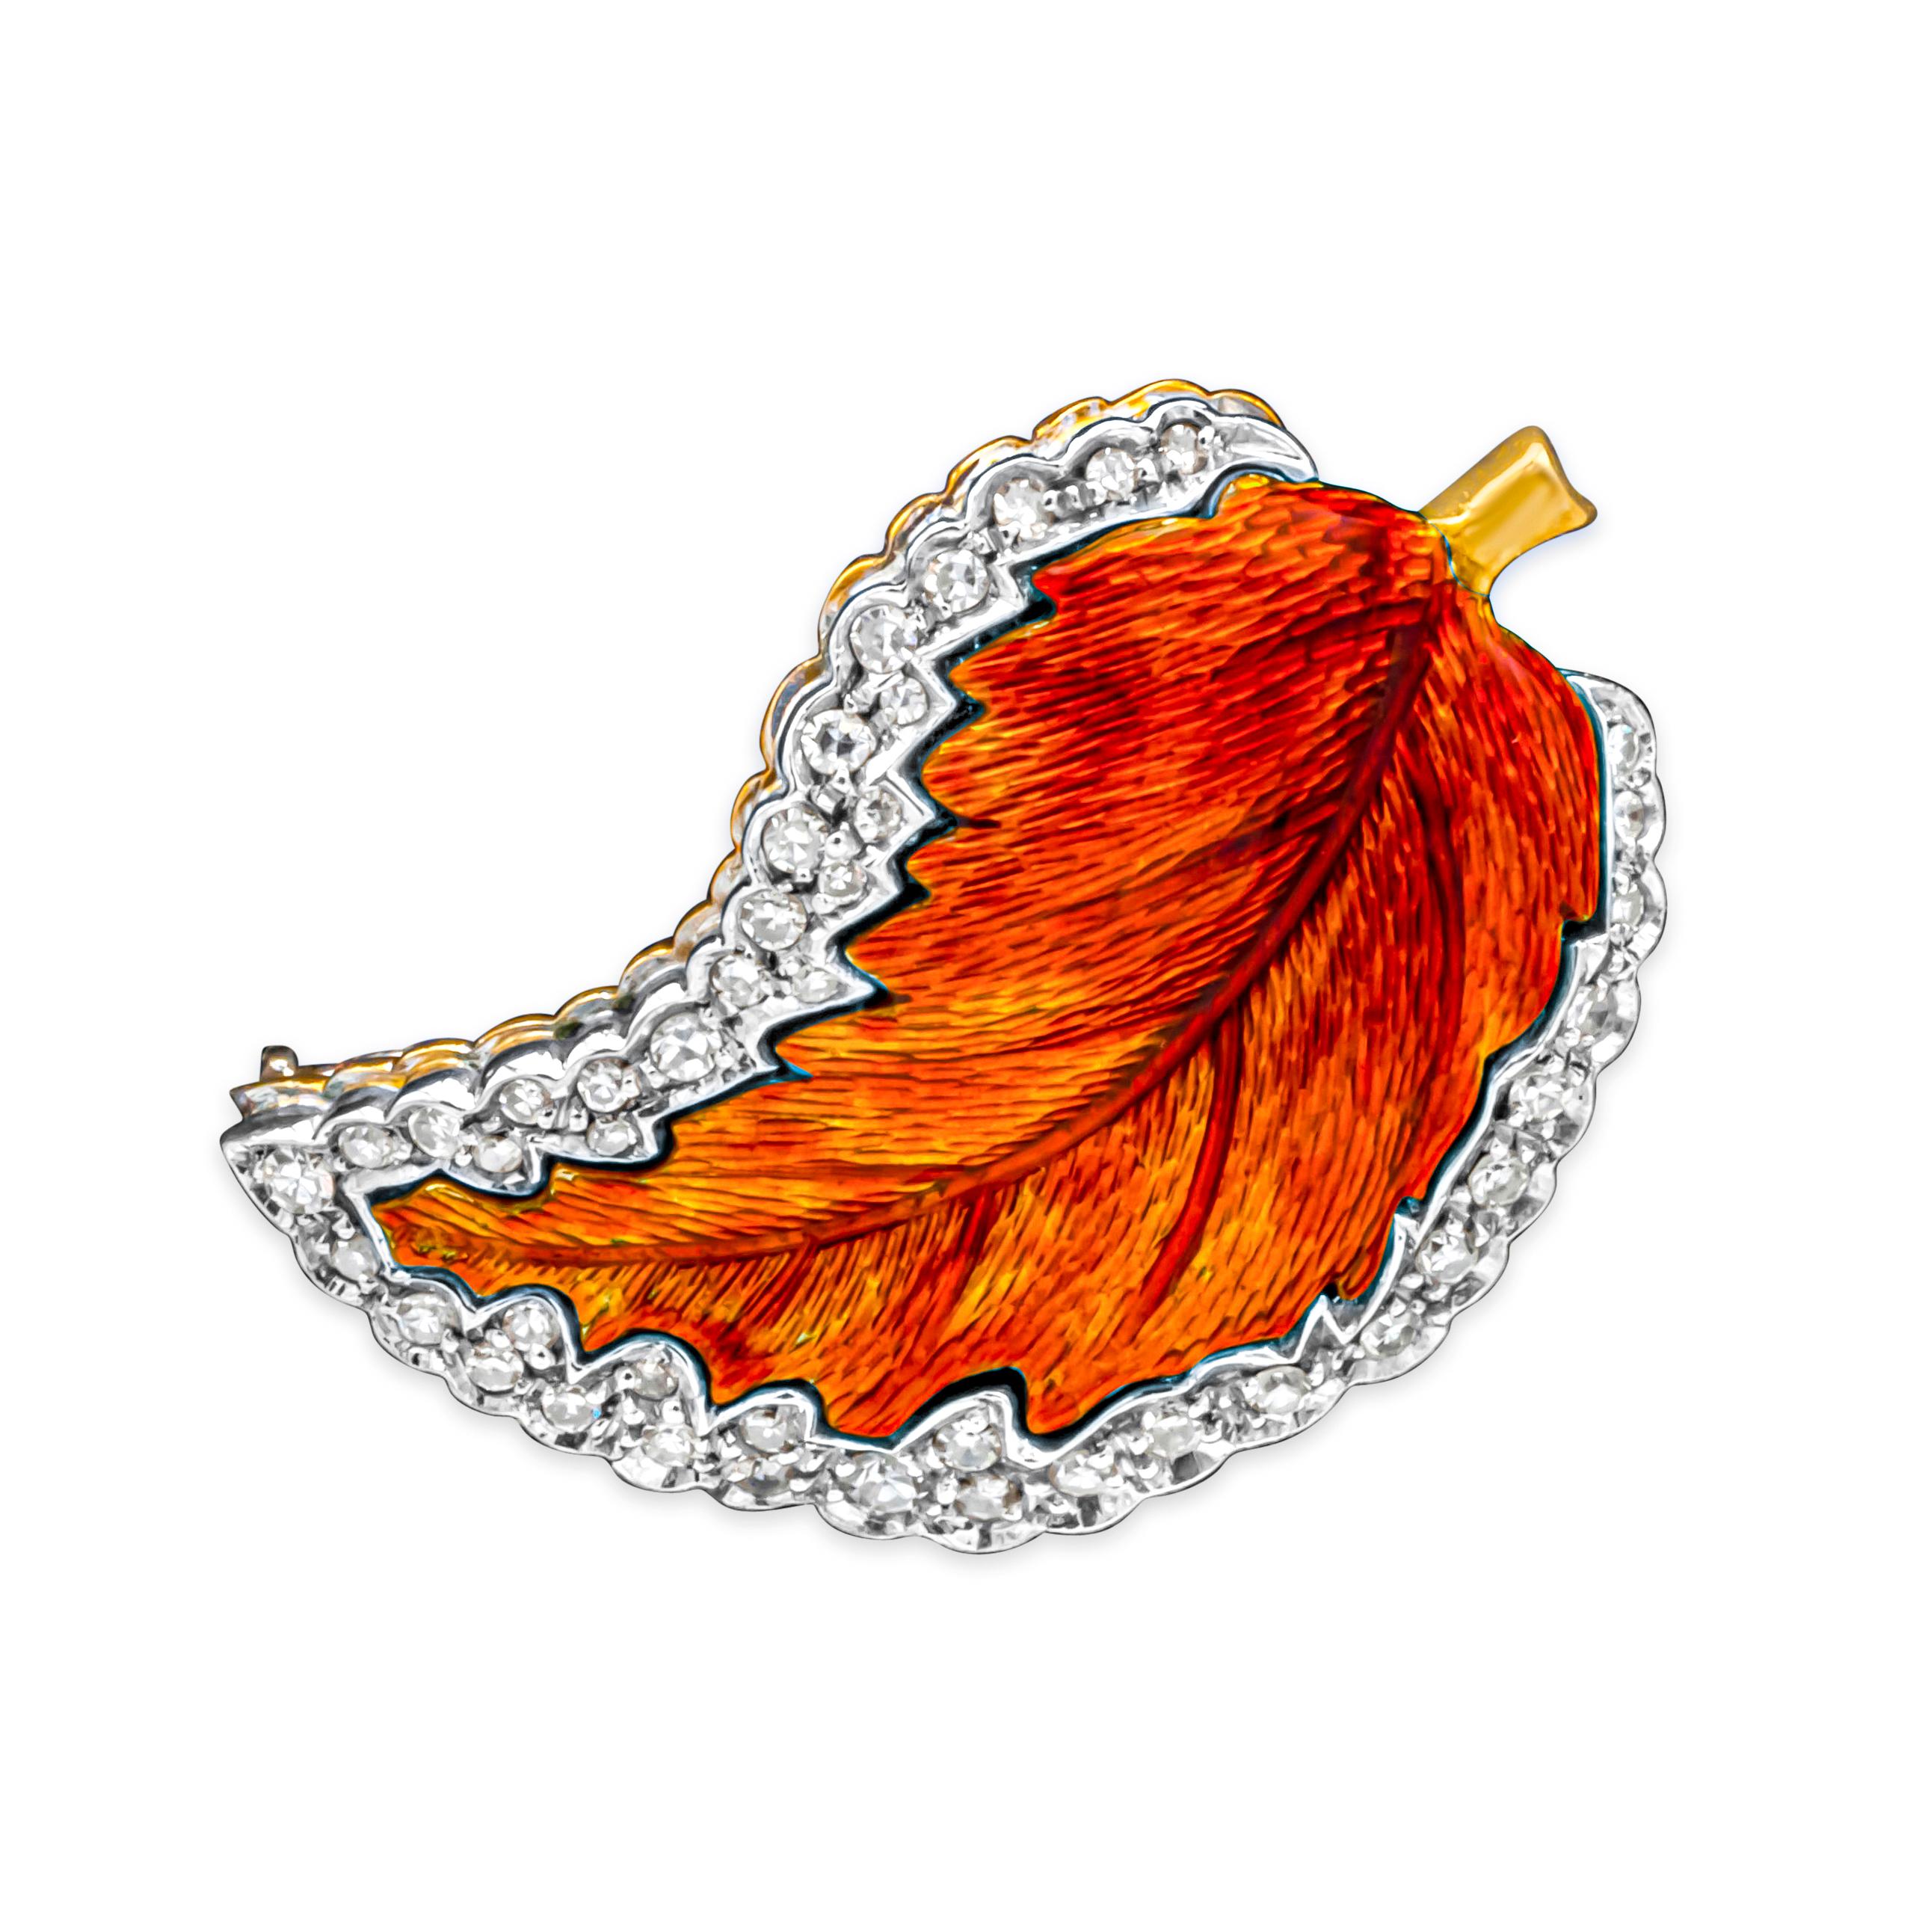 Showcasing a vintage and beautiful brooch set in a red enamel leaf-like design and surrounded by 44 brilliant round diamonds weighing 0.60 carats total, F-G color and VS-SI in clarity. Perfectly made in 18k yellow gold and platinum.

Style available